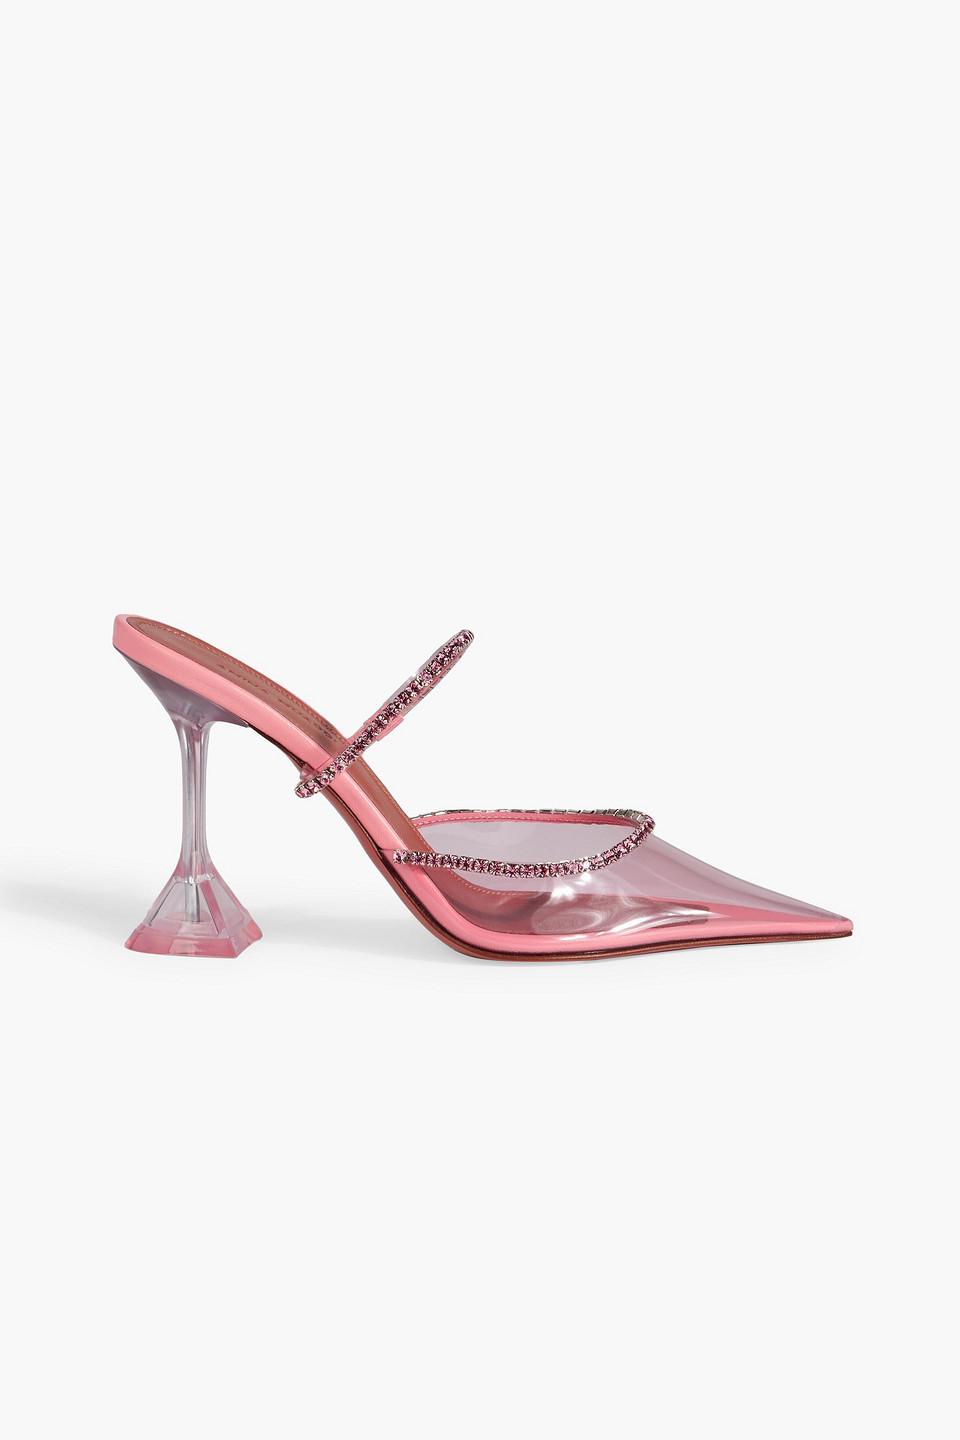 AMINA MUADDI Gilda Crystal-embellished Leather And Pvc Mules in Pink | Lyst